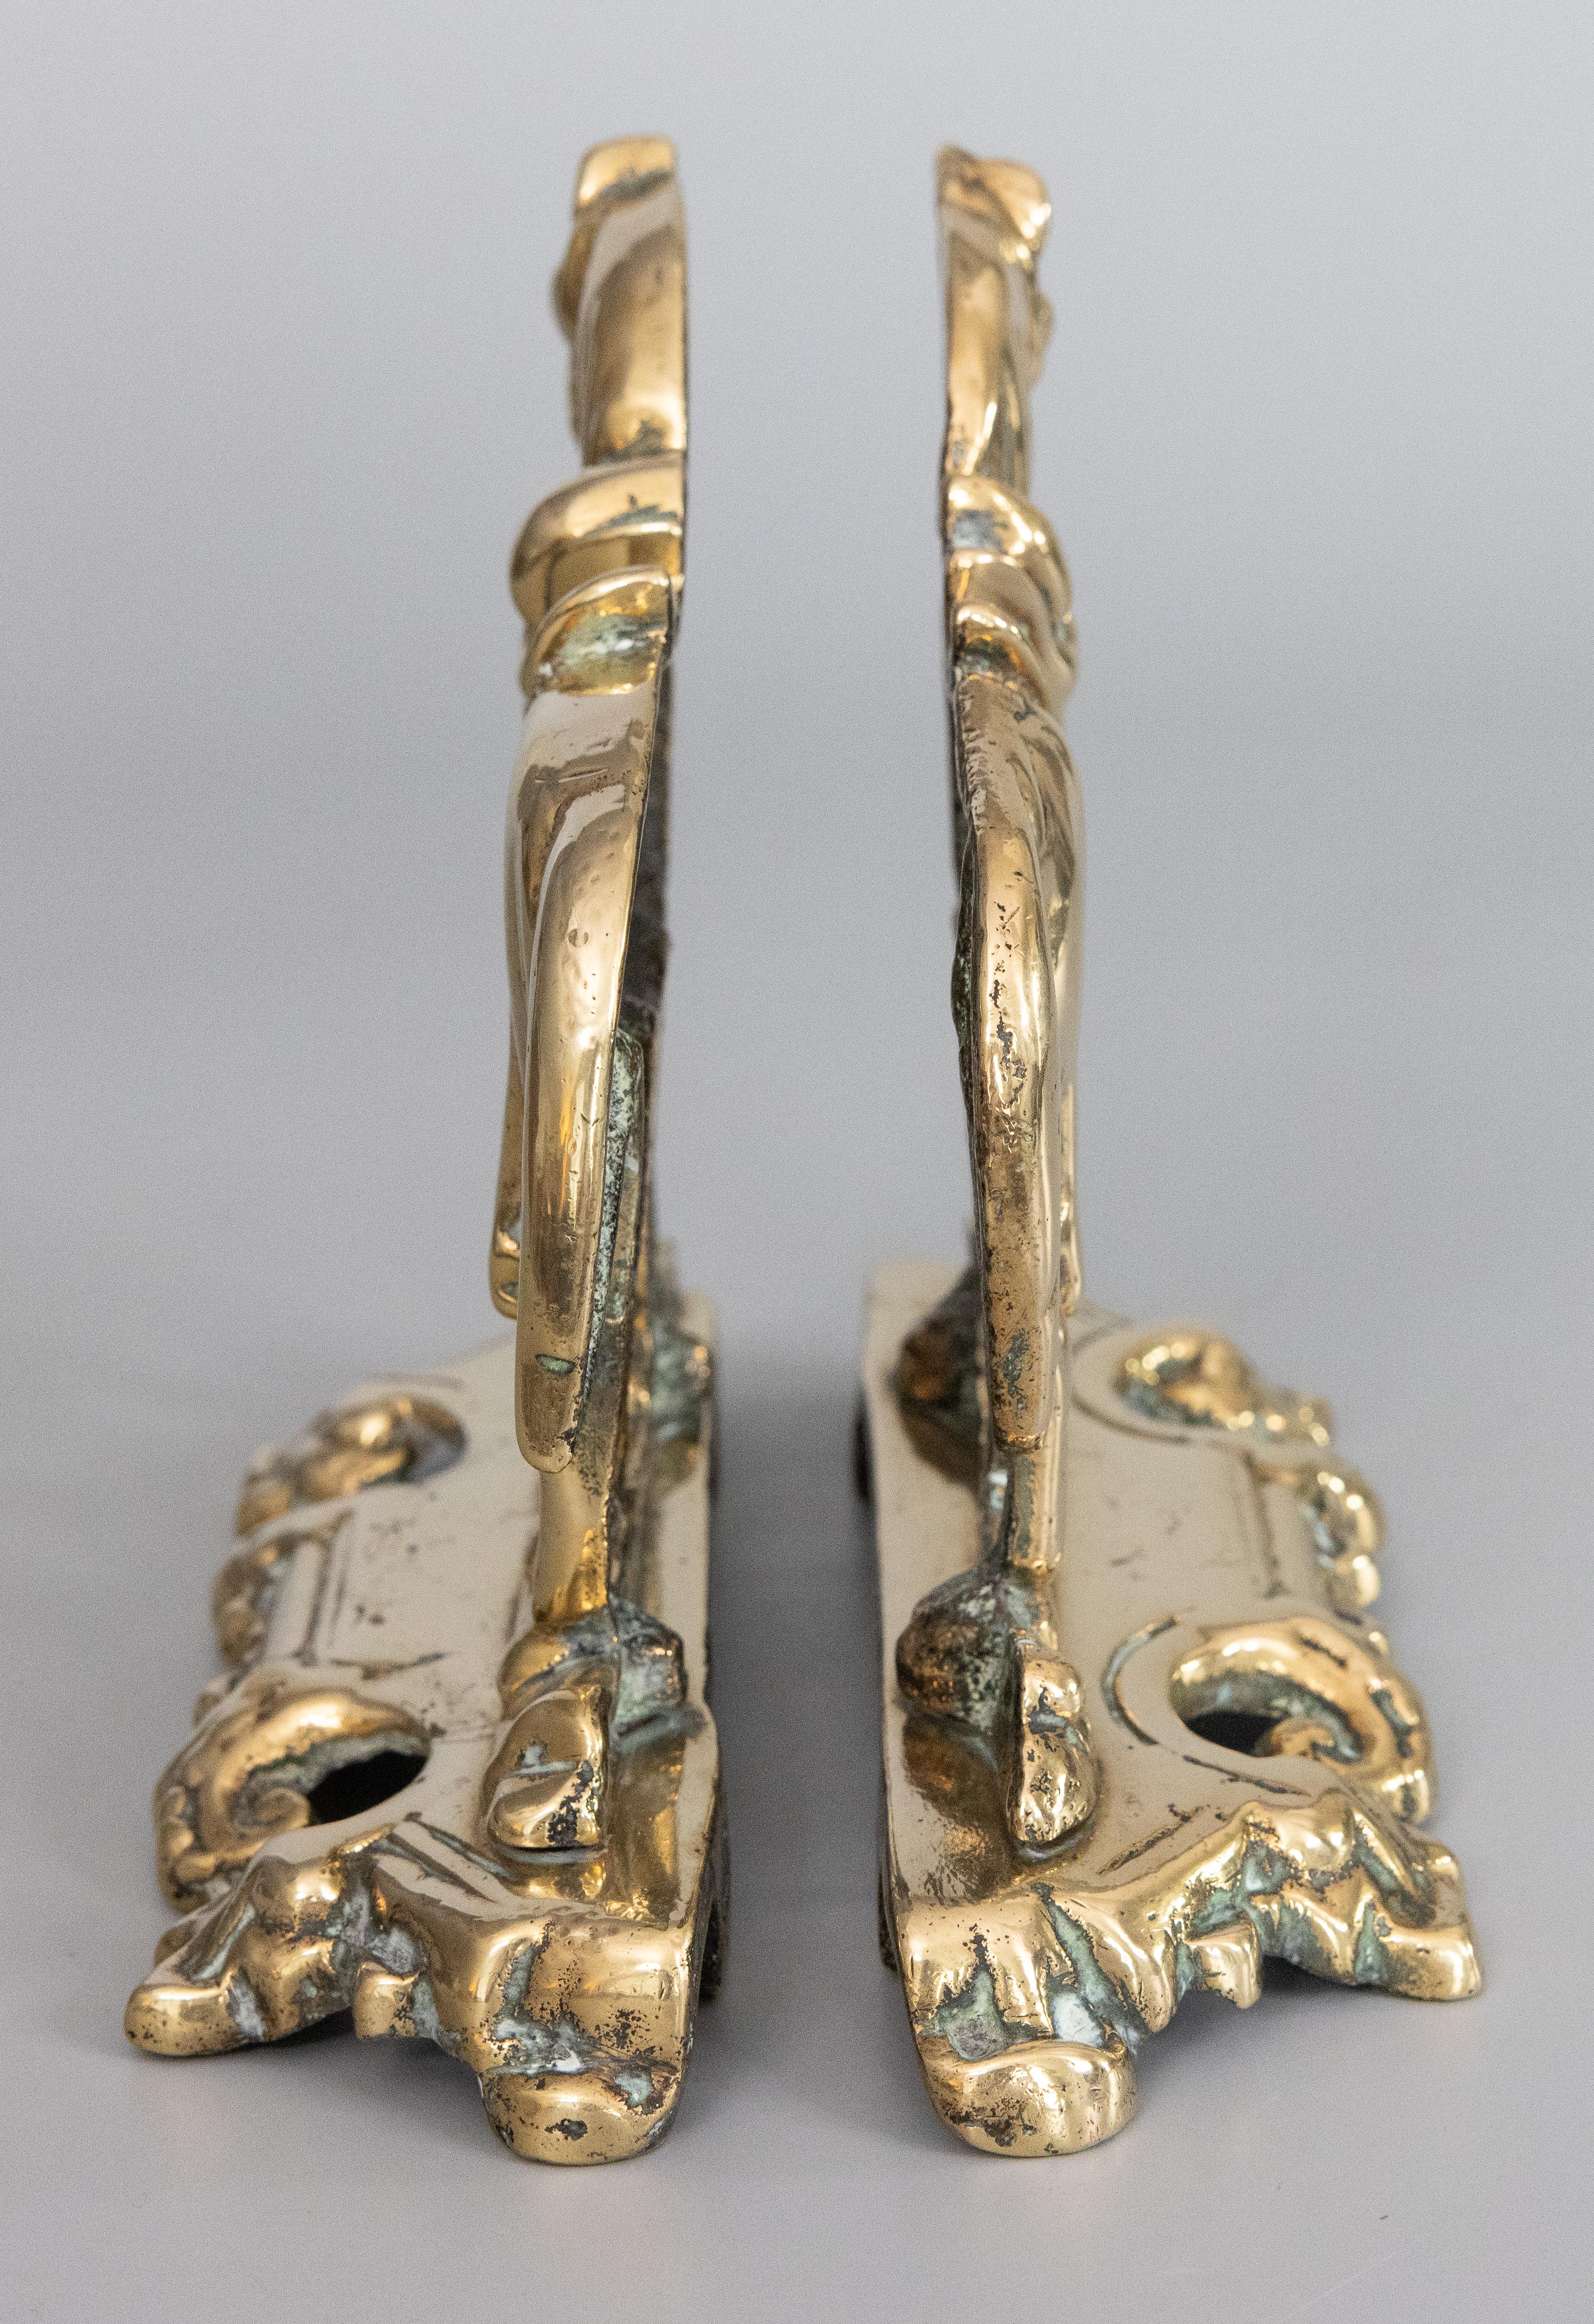 Cast Pair of 19th C. English Equestrian Brass Horses Mantel Decorations For Sale